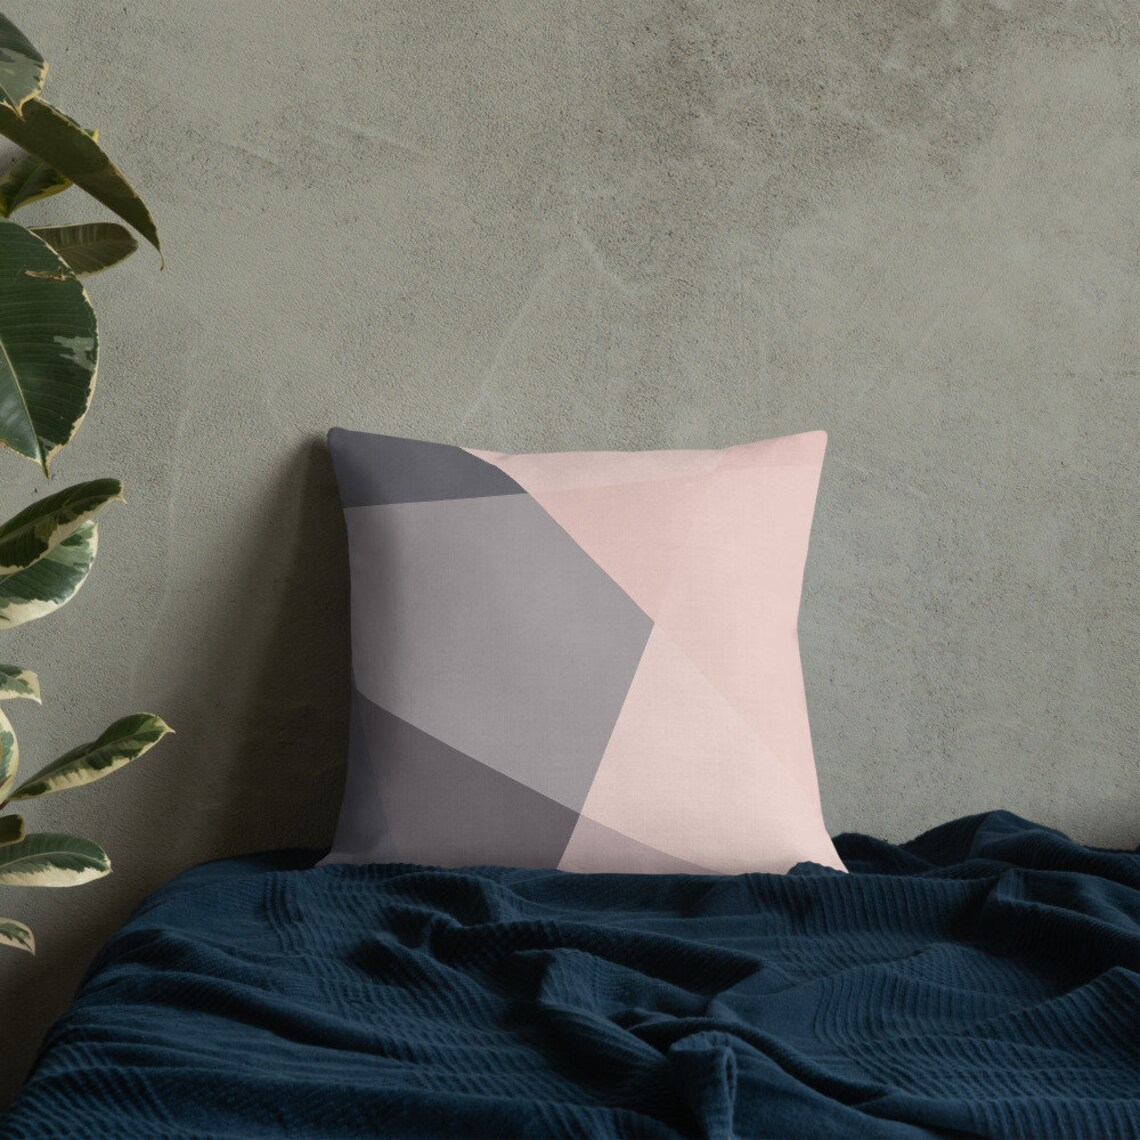 Geometric Pattern Pink and Grey Cool Cushion Premium Pillow | Etsy